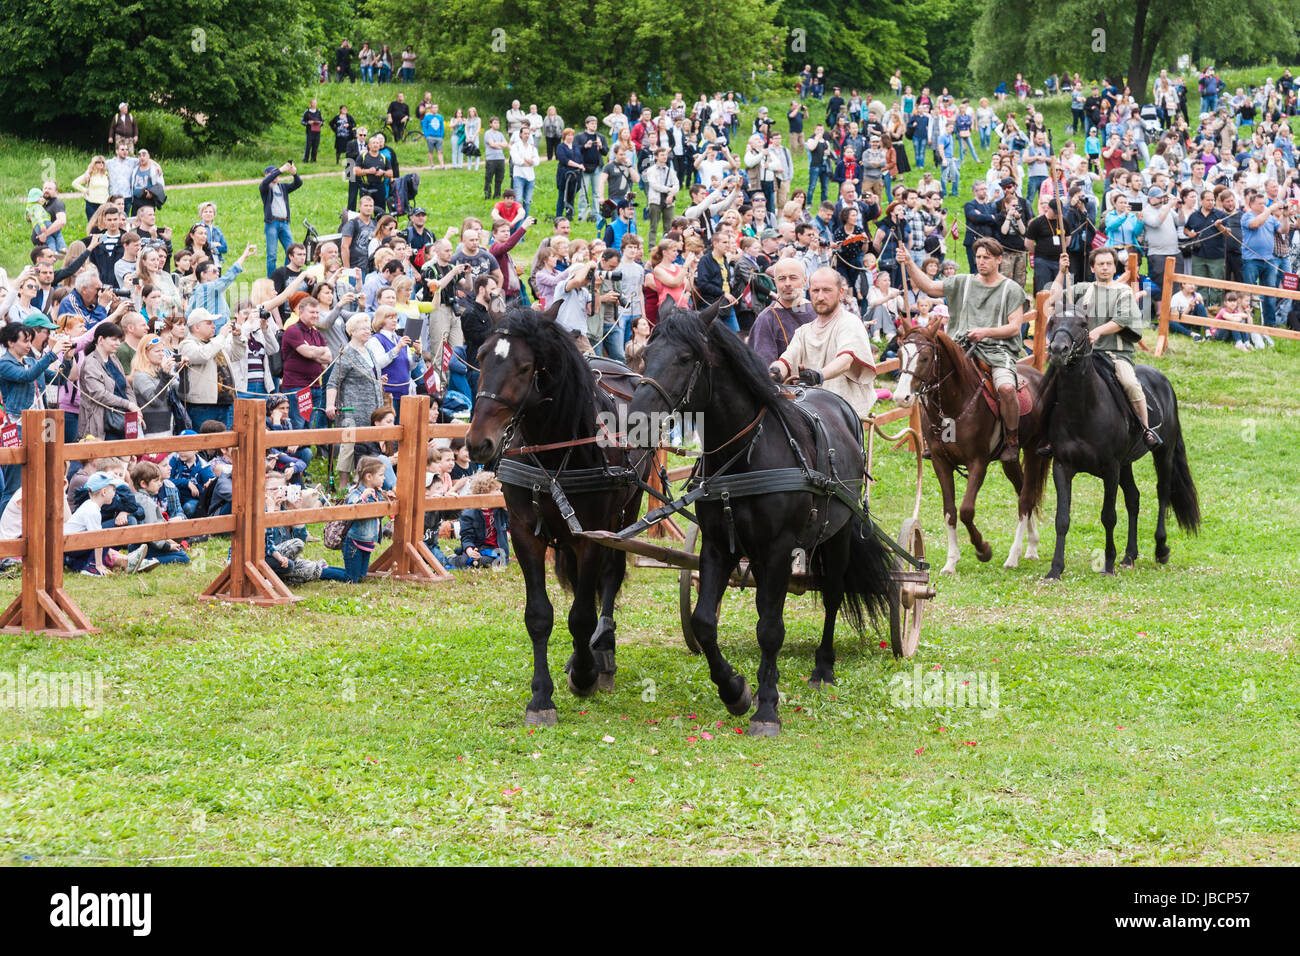 Moscow, Russia. 10th June, 2017. International Times & Epochs history reenactment festival in under way in Moscow. About 6000 reenactors from around the world take part in this 12 day long festival. They represent many history periods from times of ancient Greece and Rome to XX century on more than 15 festival areas all over the city. Ancient Rome period everyday life scenes, gladiator games and other events are presented in Kolomenskoe public park. Publius Quinctilius Varus legions on the last march to Teutoburg forest. Credit: Alex's Pictures/Alamy Live News Stock Photo